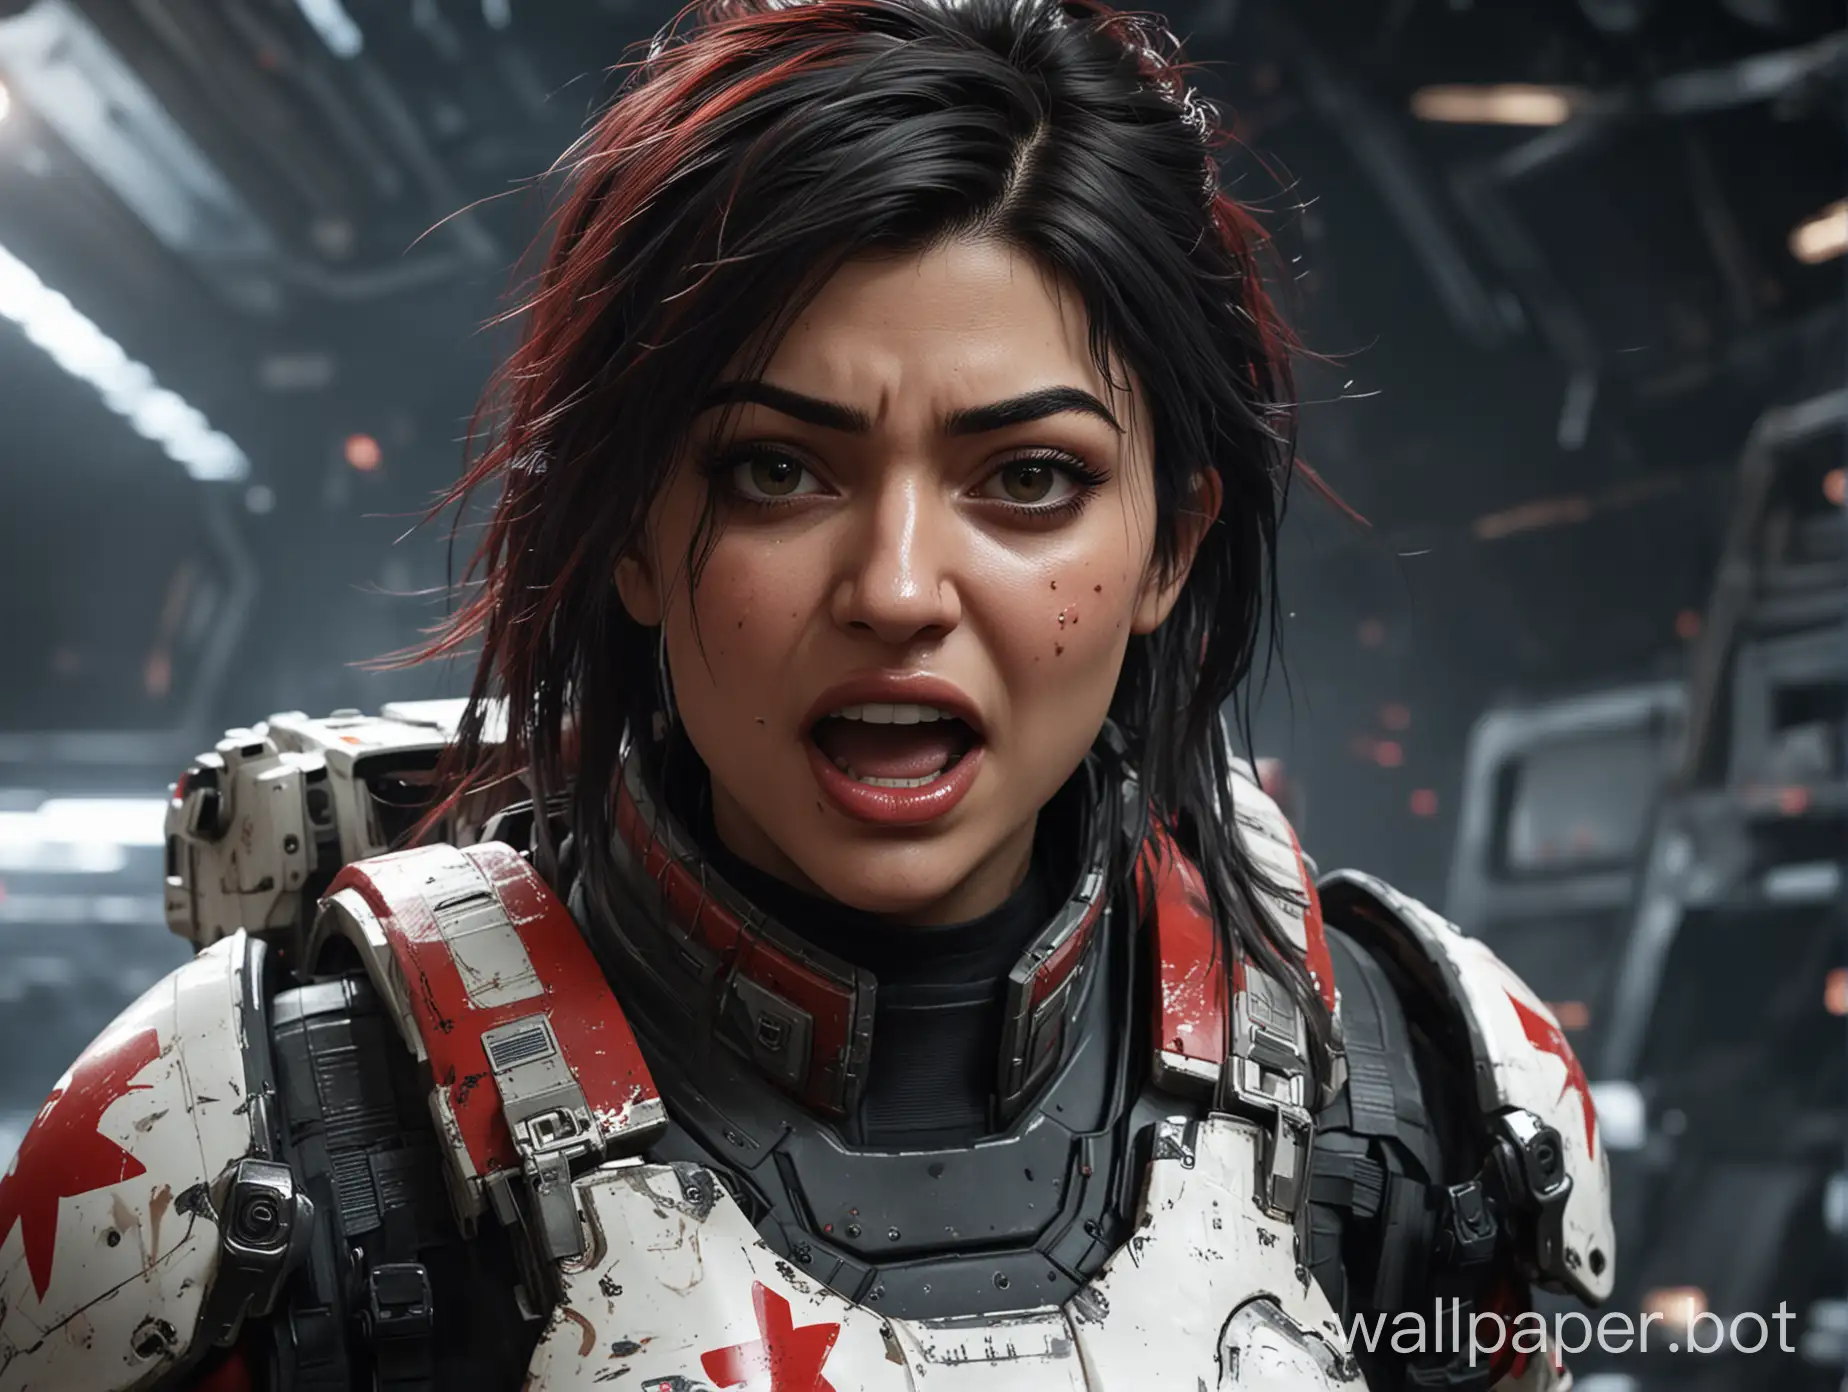 Star Citizen, yelling woman with kylie Jenner face, action scene, battle, perspire, feeling pain, tears, open mouth anger yell, extreme close-up headshot, space background, emergancy, hearty expression, curvy female bodyshape, black open messy hair, Medic, red cross, first aid, shiny cyber armor with the 2 colors white and red , curvy female bodyshape, sci-fi,